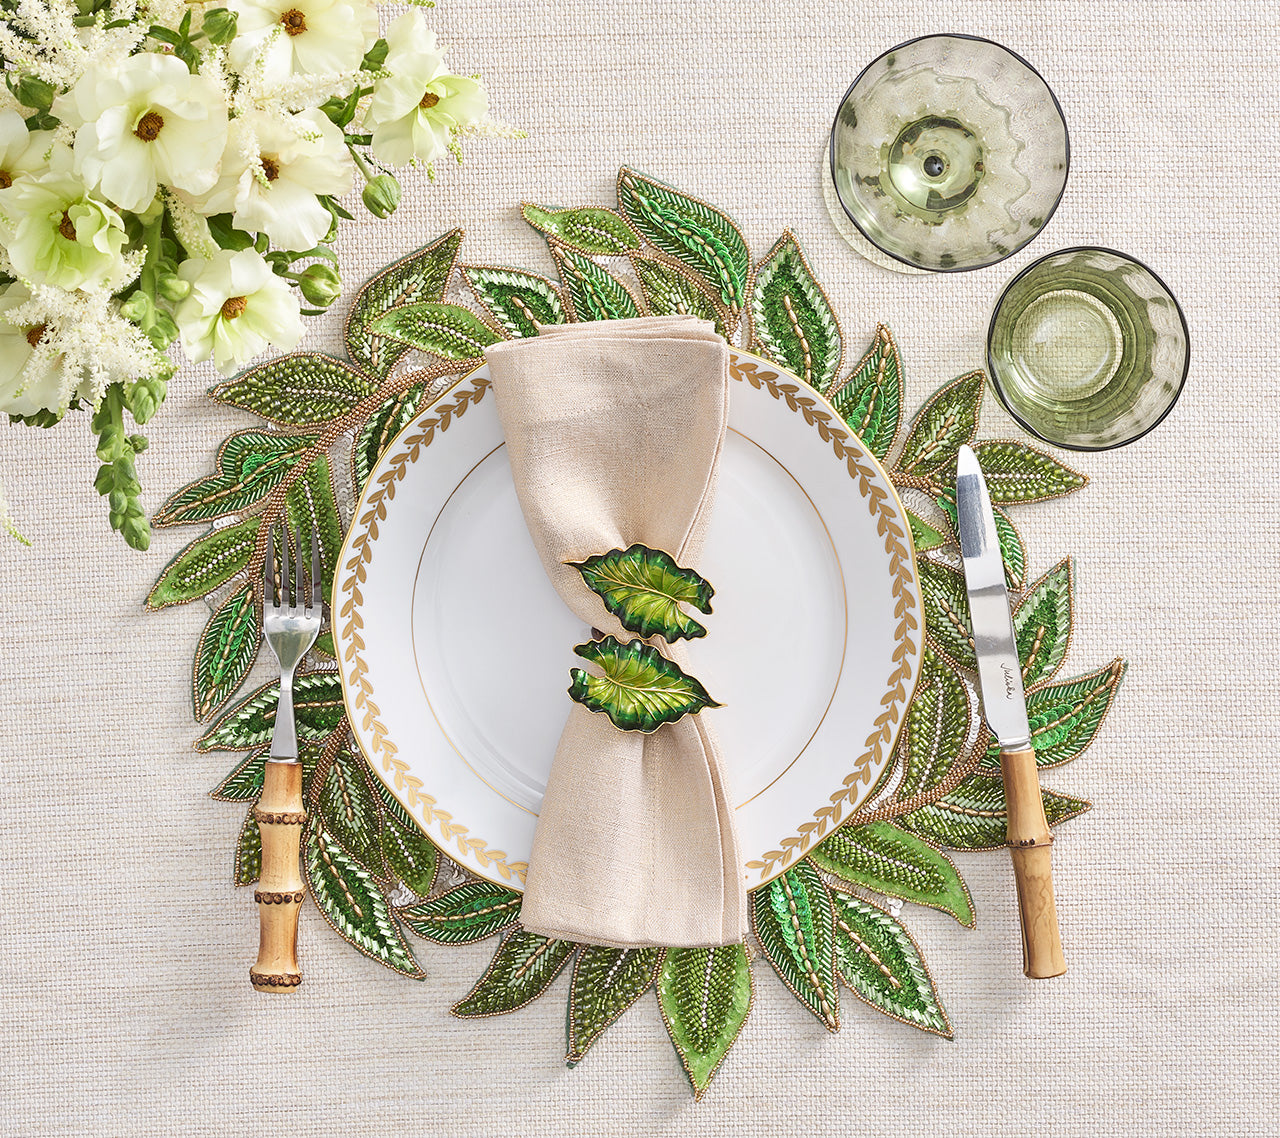 Trellis Placemat in Green & Gold, Set of 2